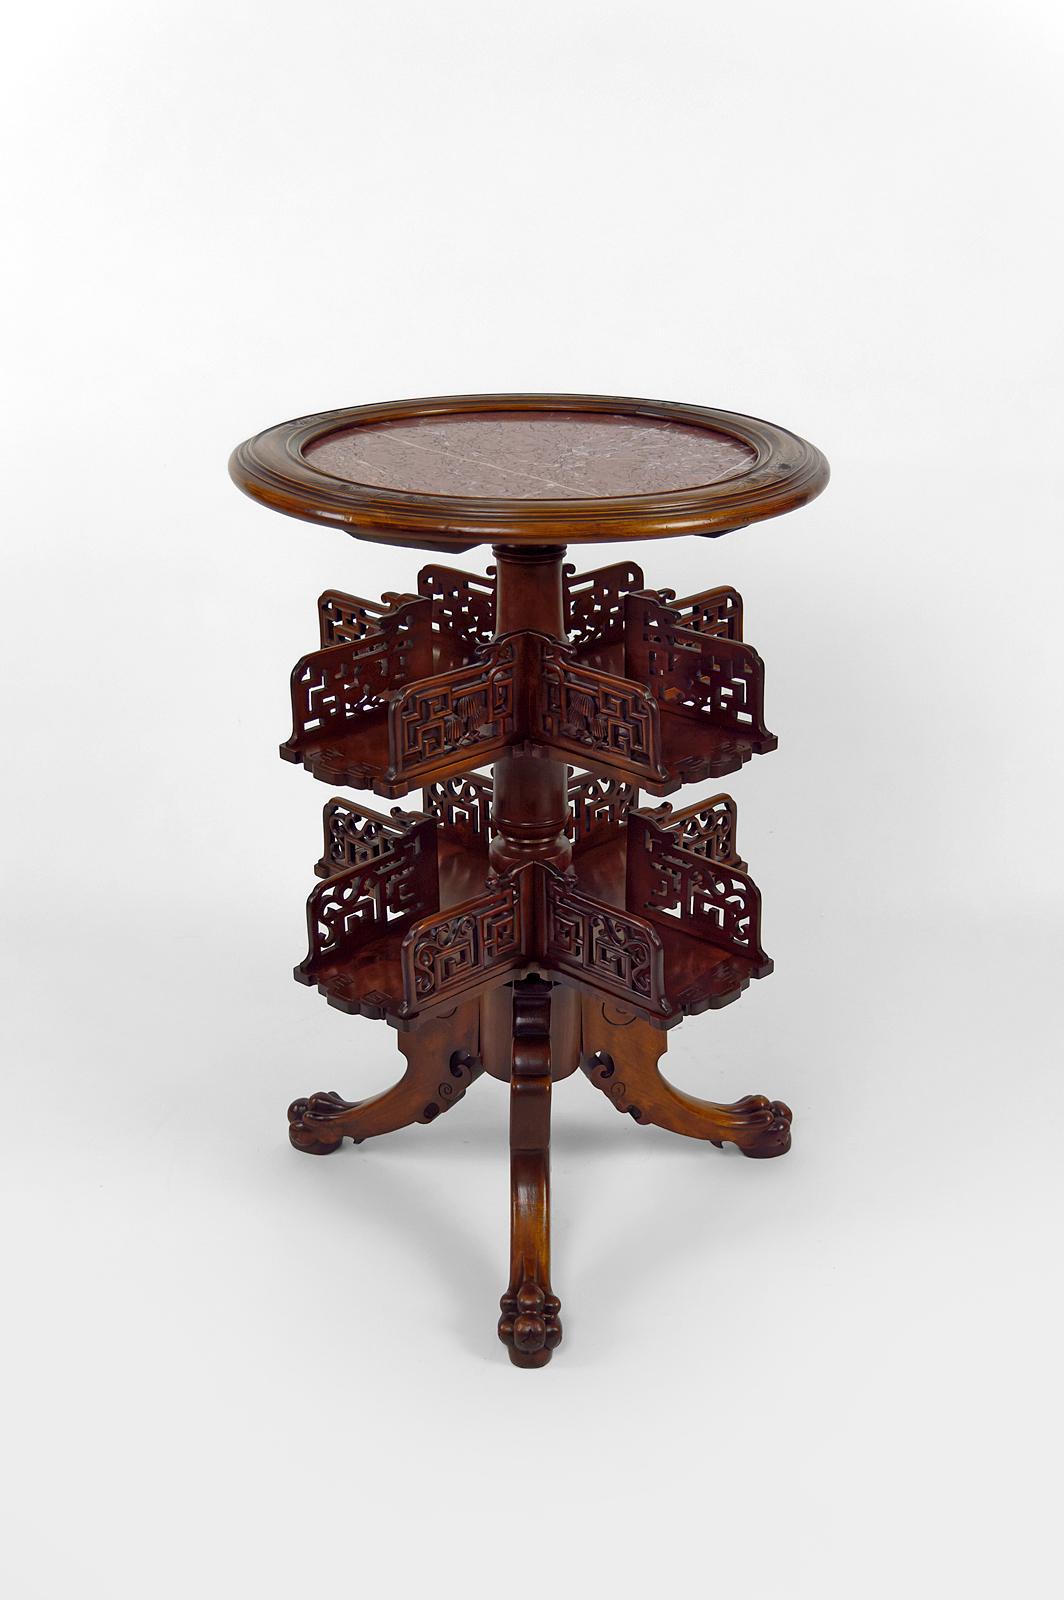 Rare pedestal table / revolving bookcase in Japanese / Chinese / Asian style, richly carved.

With red marble top with white veins, openwork swivel shelves and tripod base carved with dragon / demon heads and clawed legs.

Can be adapted to many